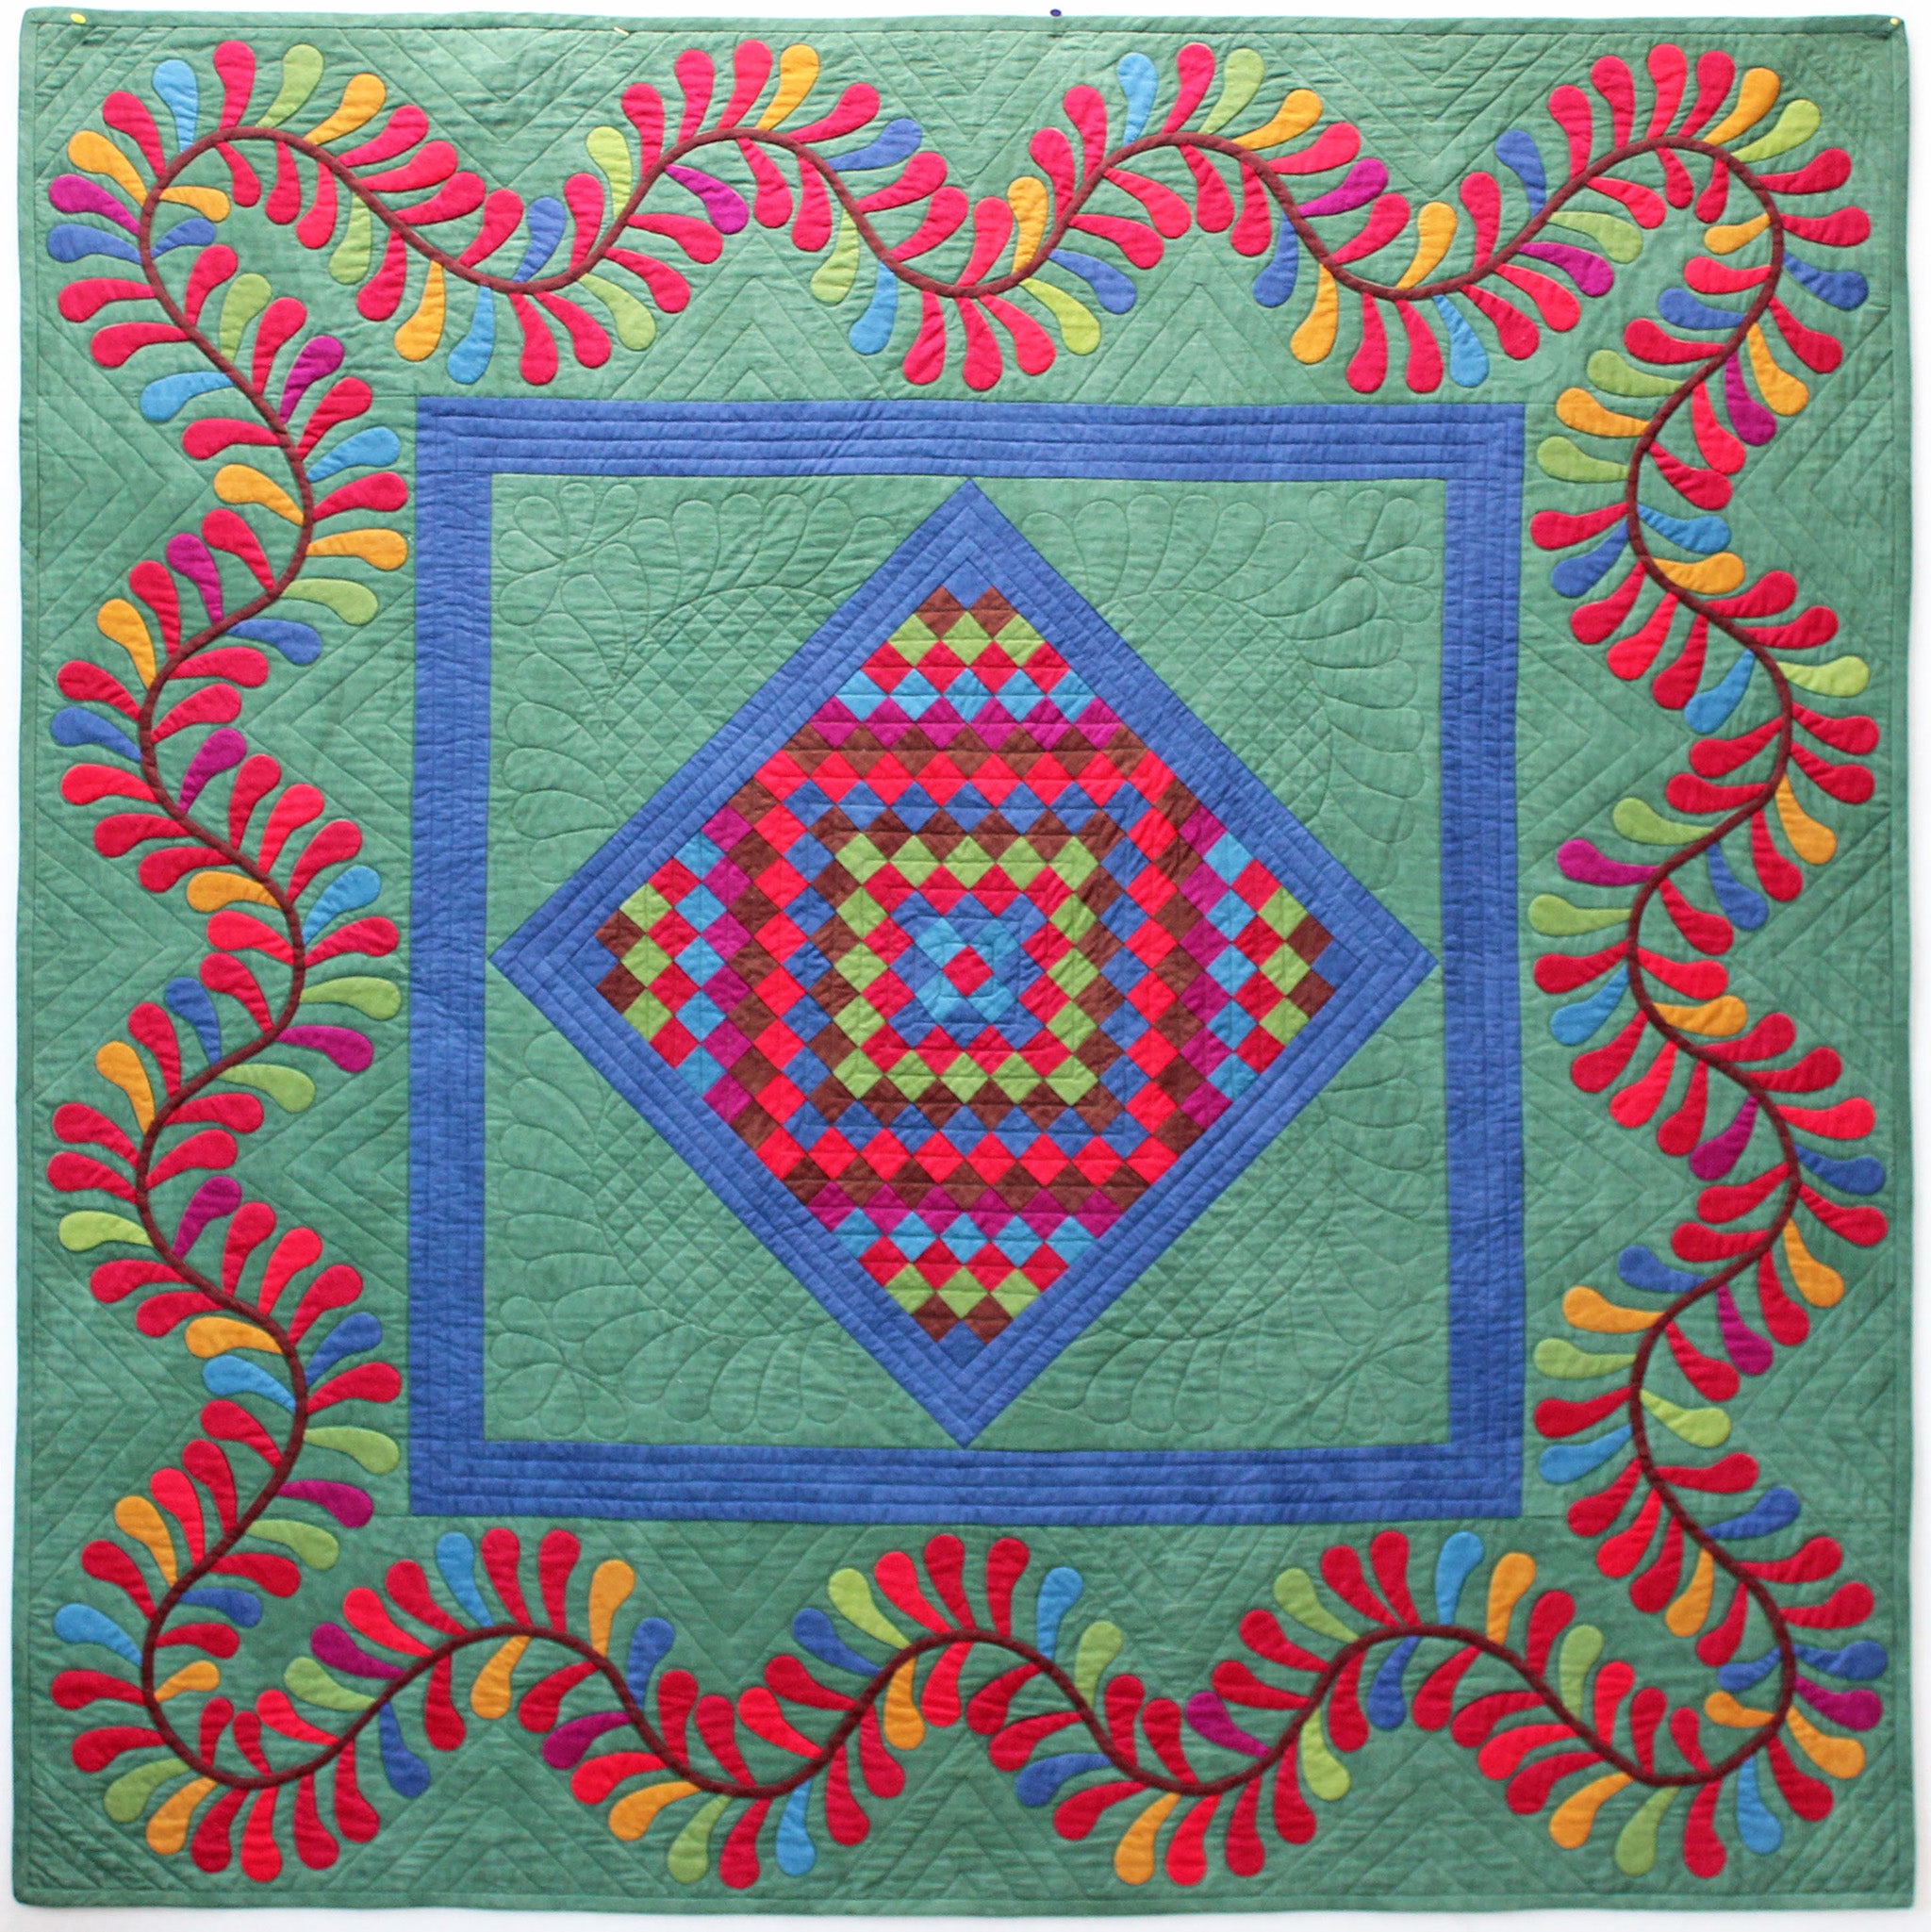 Amish-Inspired Quilts (Print-On-Demand)